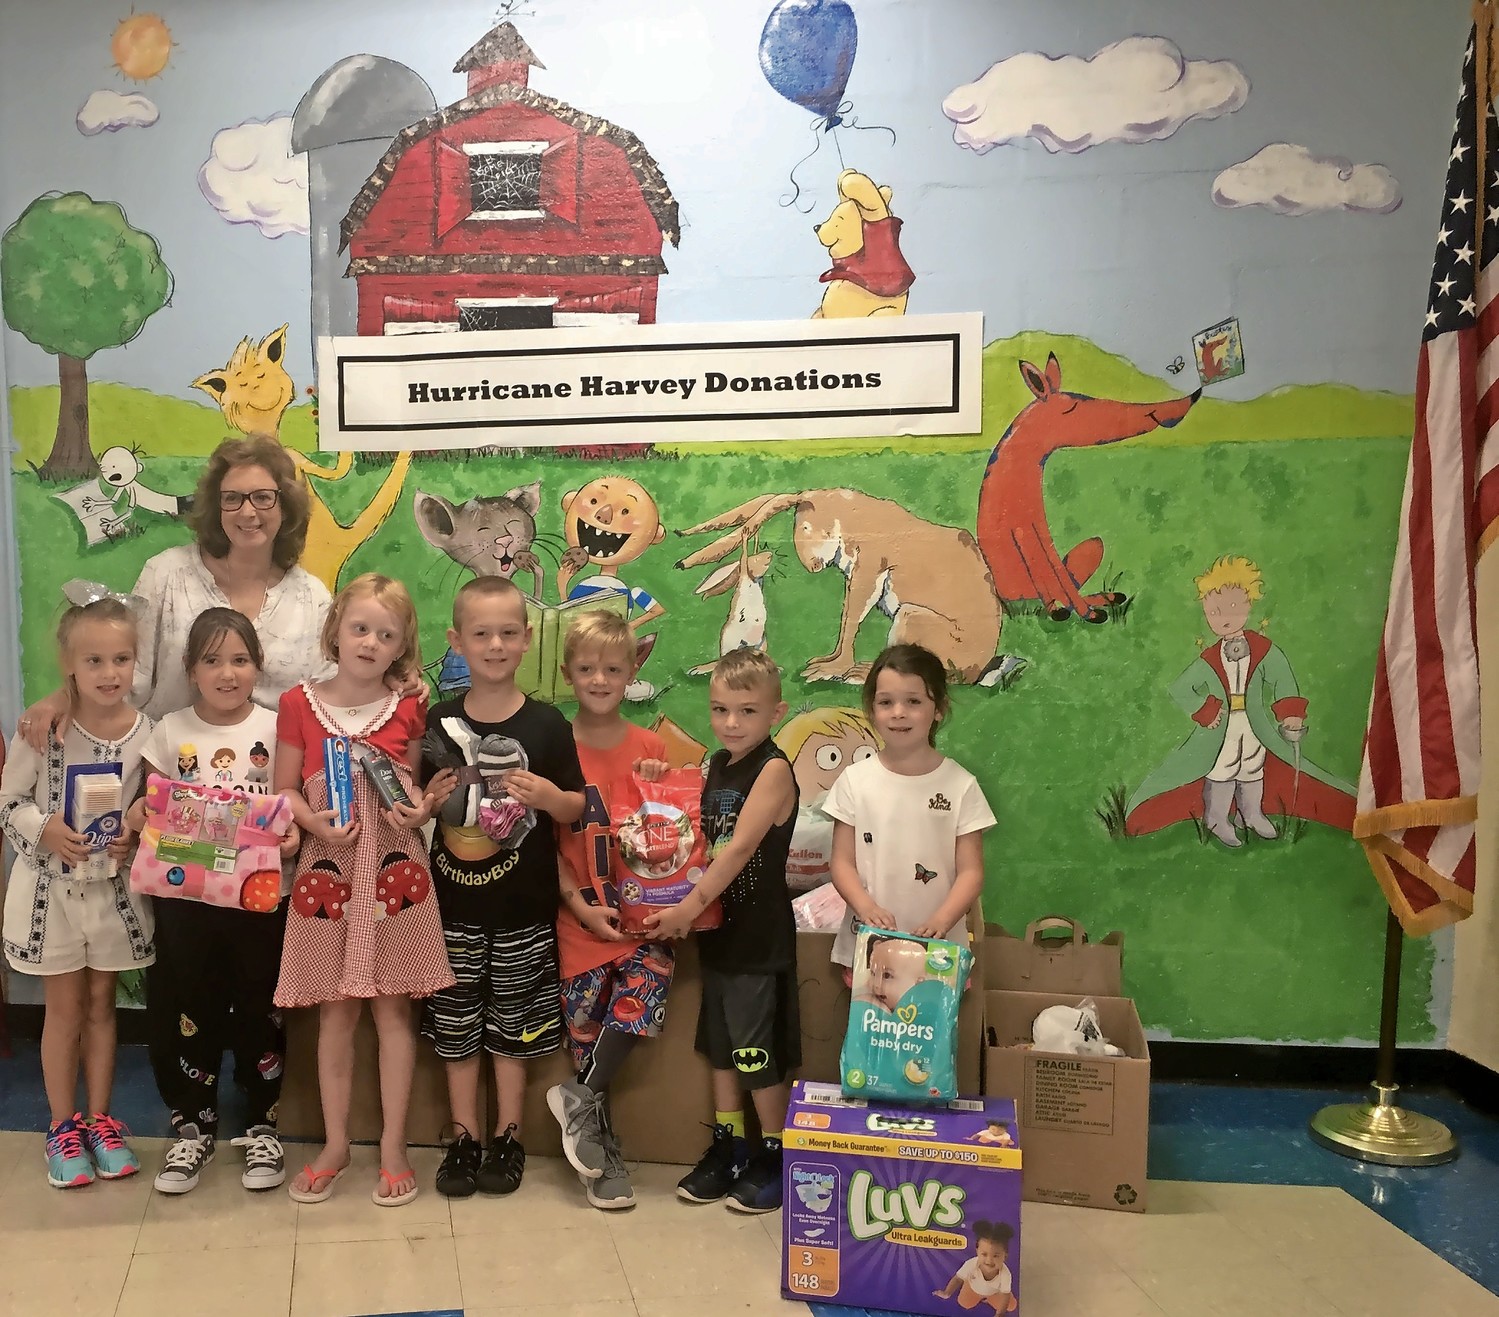 Cheryl Schwartz, back left, a first-grade teacher, conceptualized Mandalay Elementary School’s Hurricane Harvey relief drive. Her students donated supplies, which were sent to storm victims.